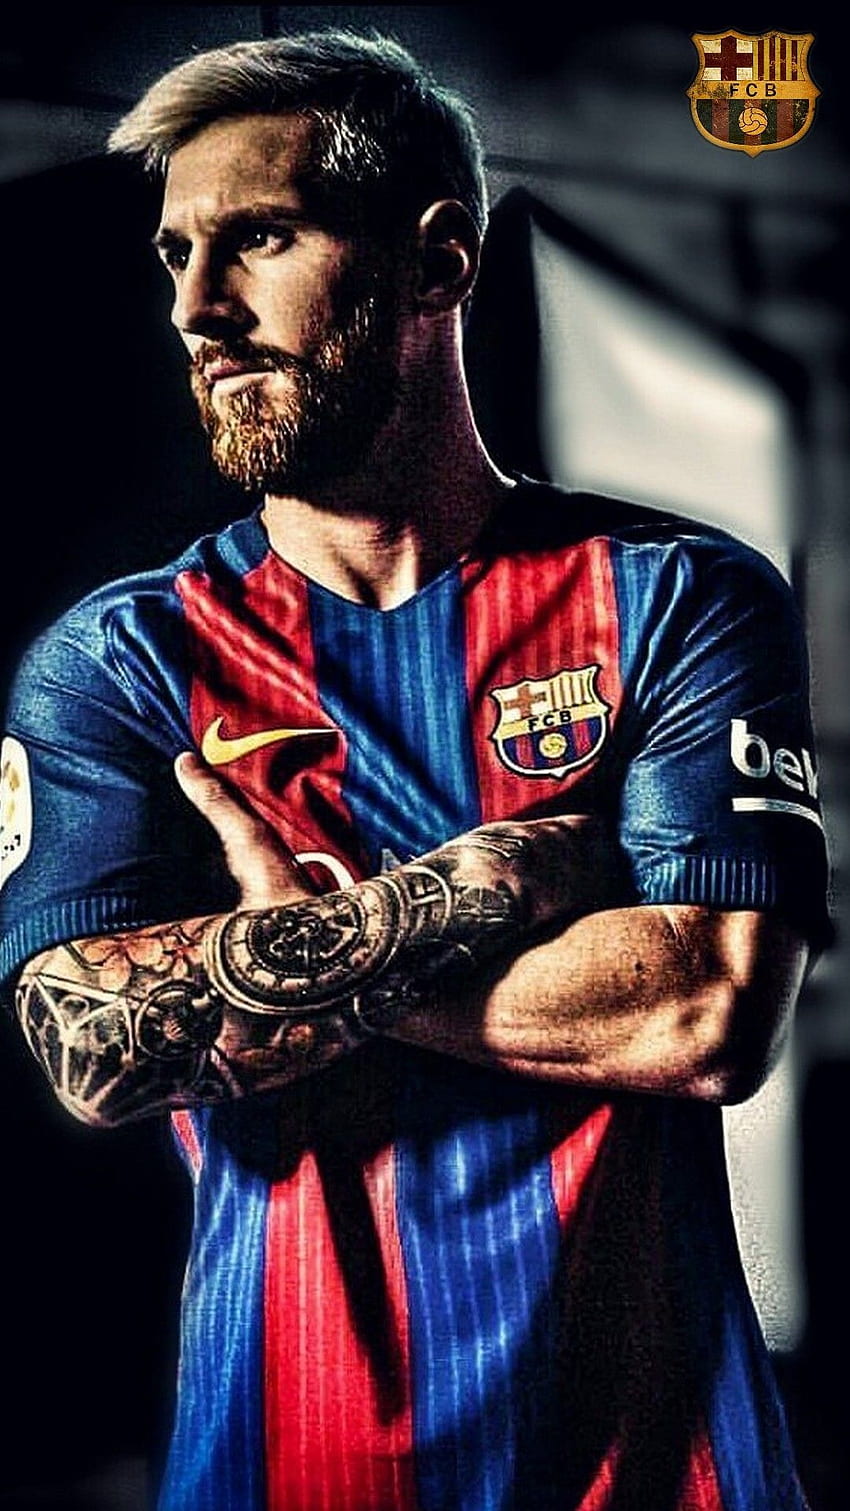 Messi iPhone Wallpapers  Top Free Messi iPhone Backgrounds   WallpaperAccess